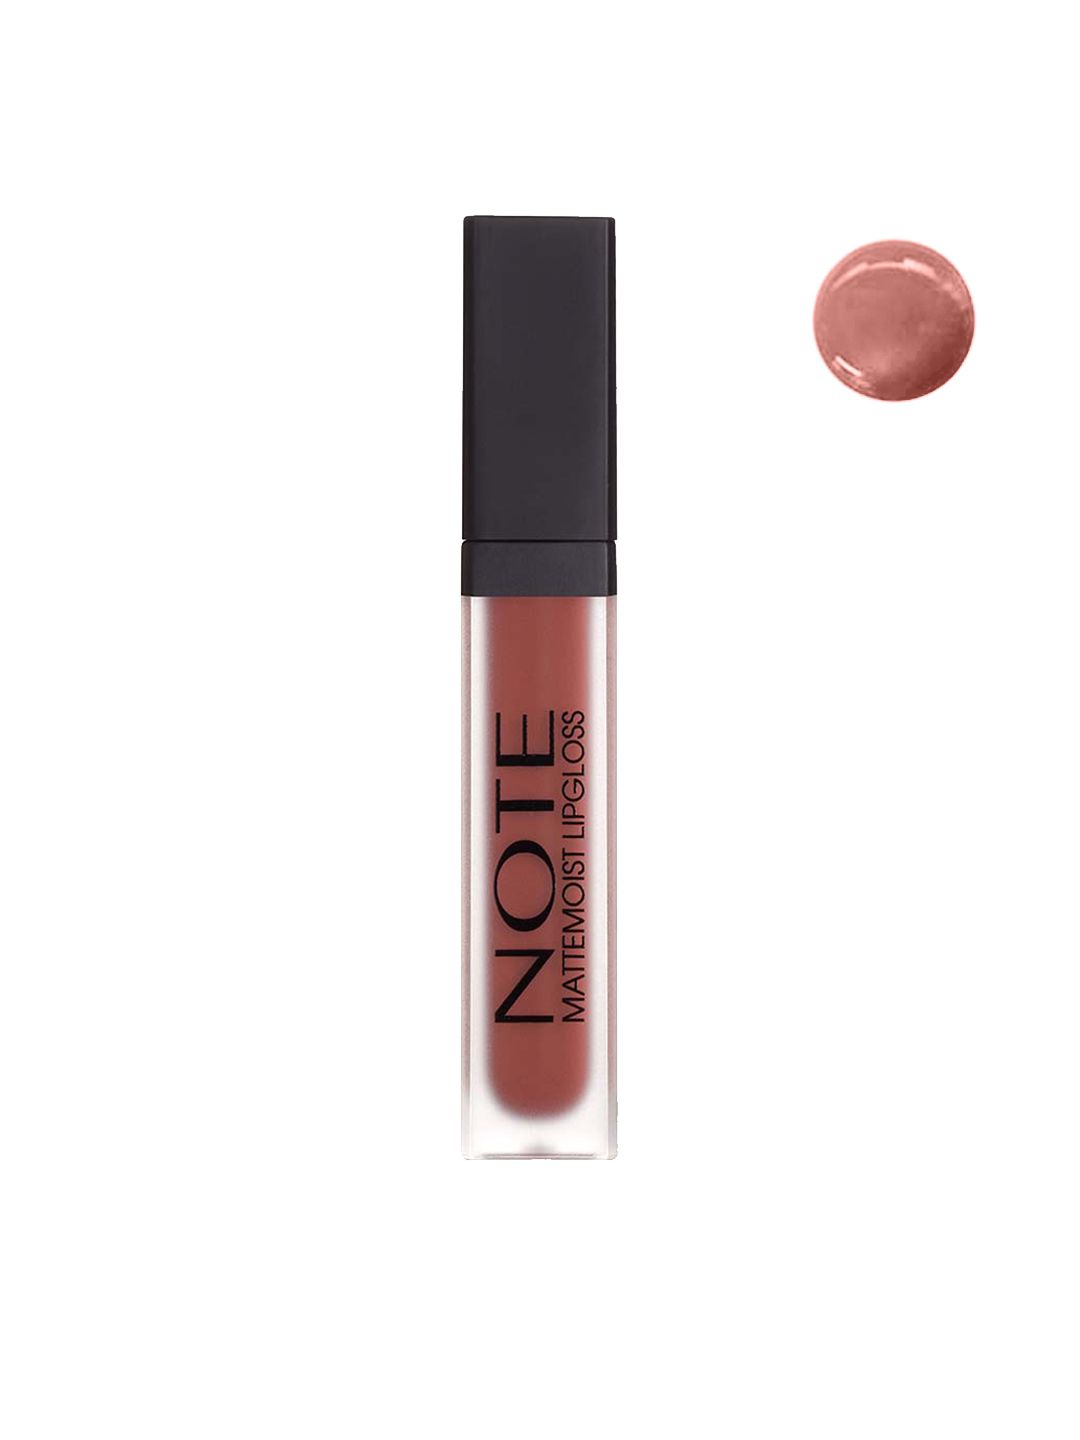 Note Clover Brown Mattemoist Lipgloss 416 Price in India